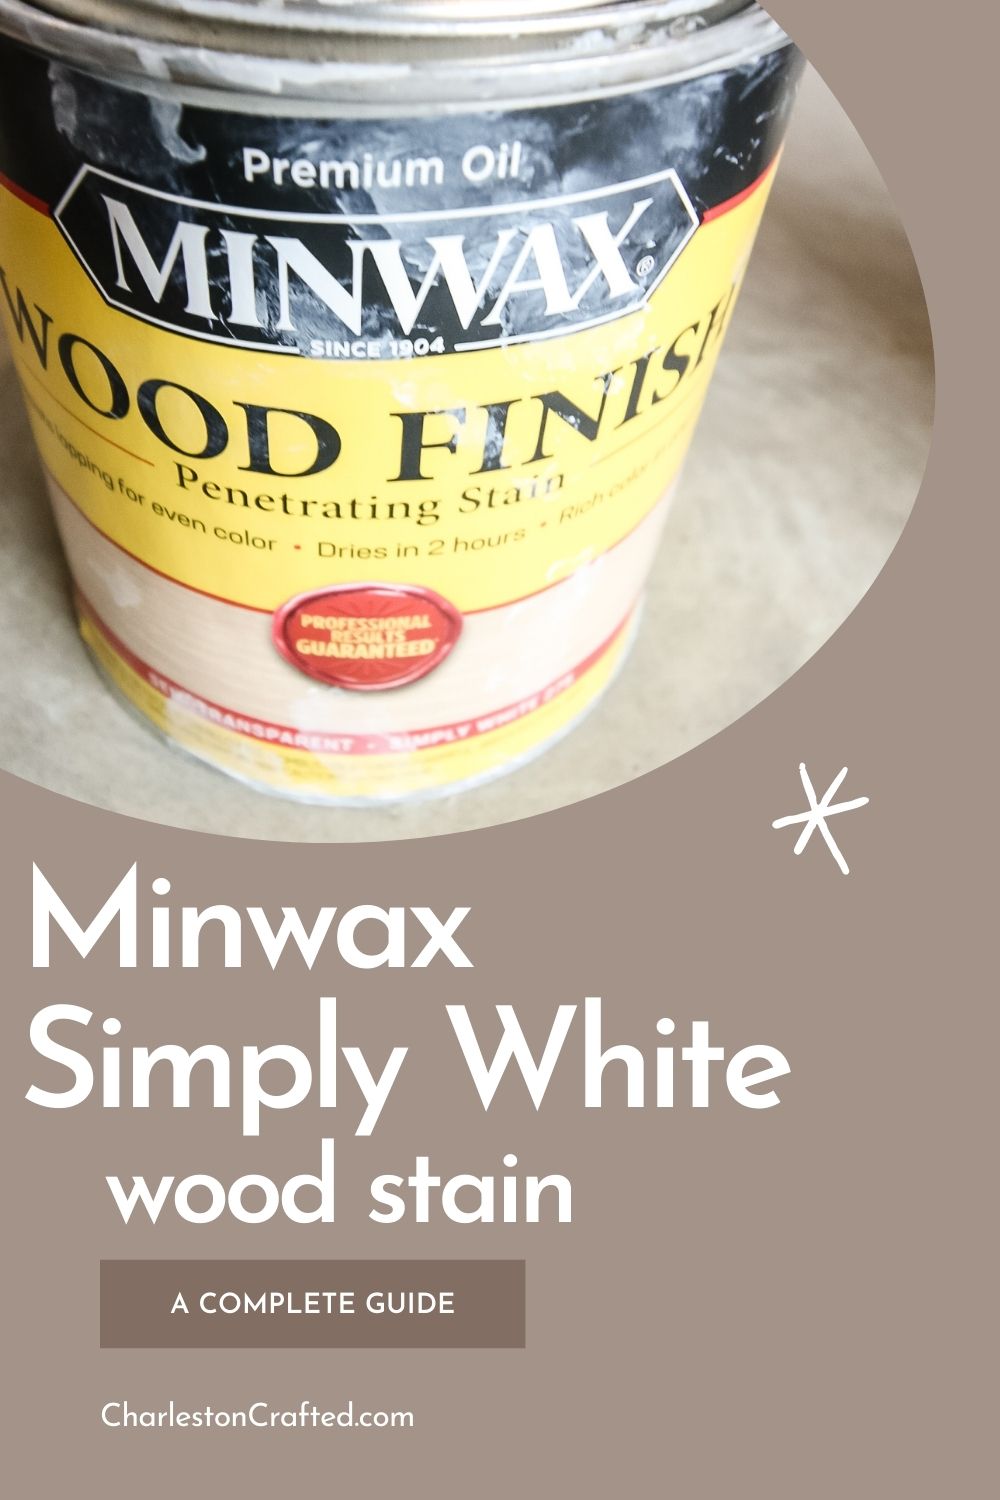 painting - How can I stain wood white? - Home Improvement Stack